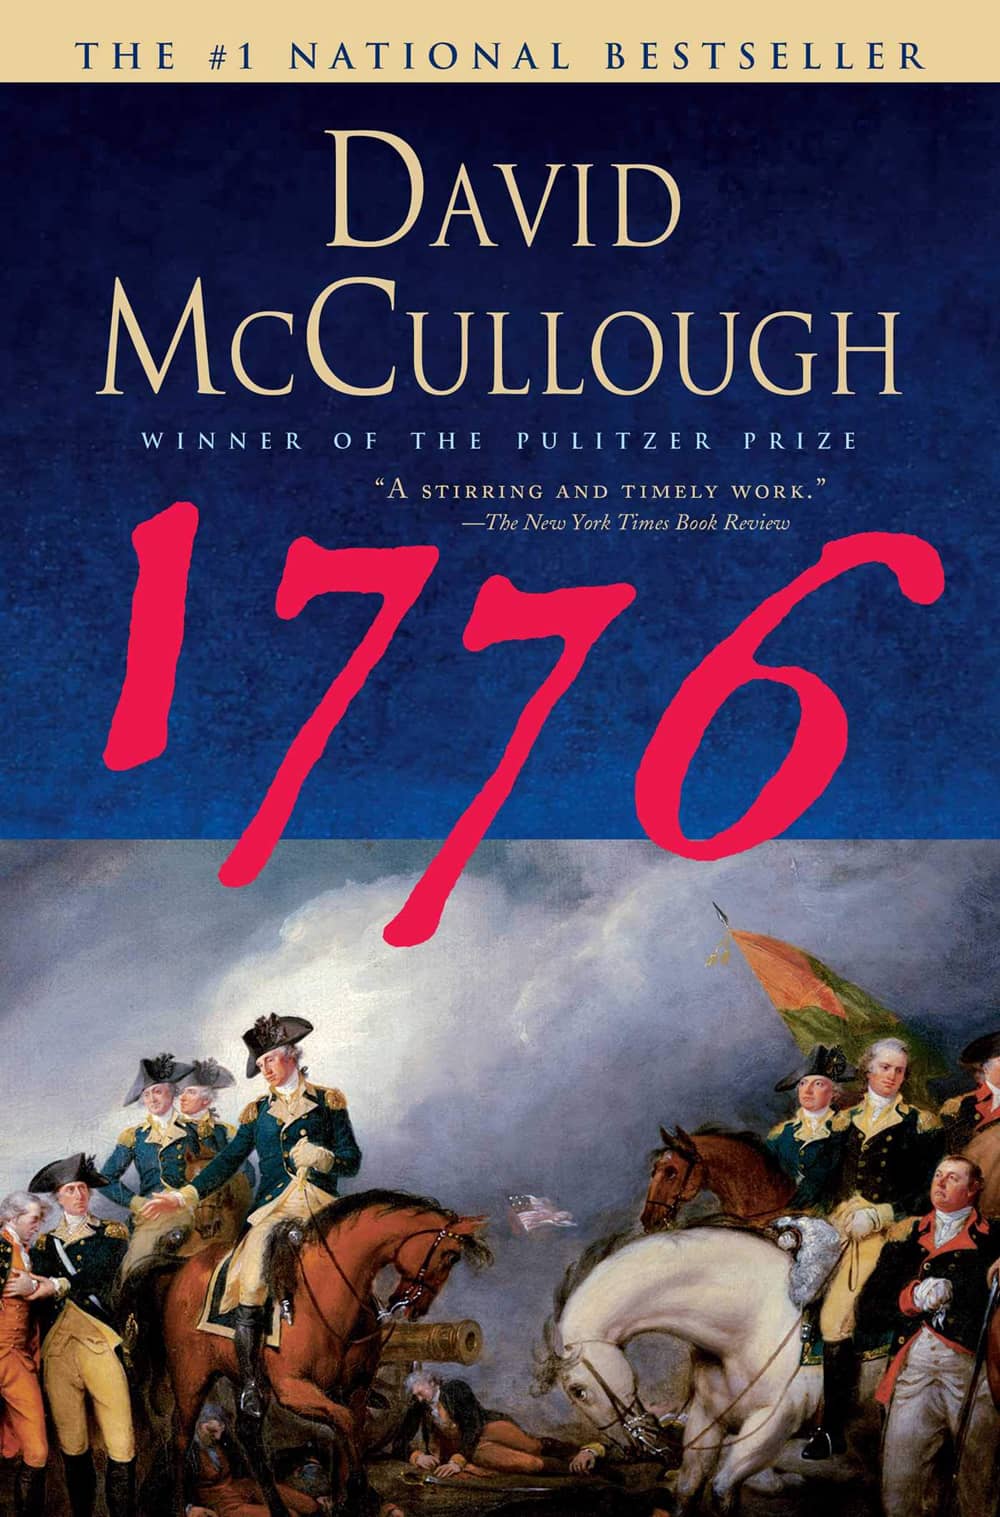 The cover of 1776